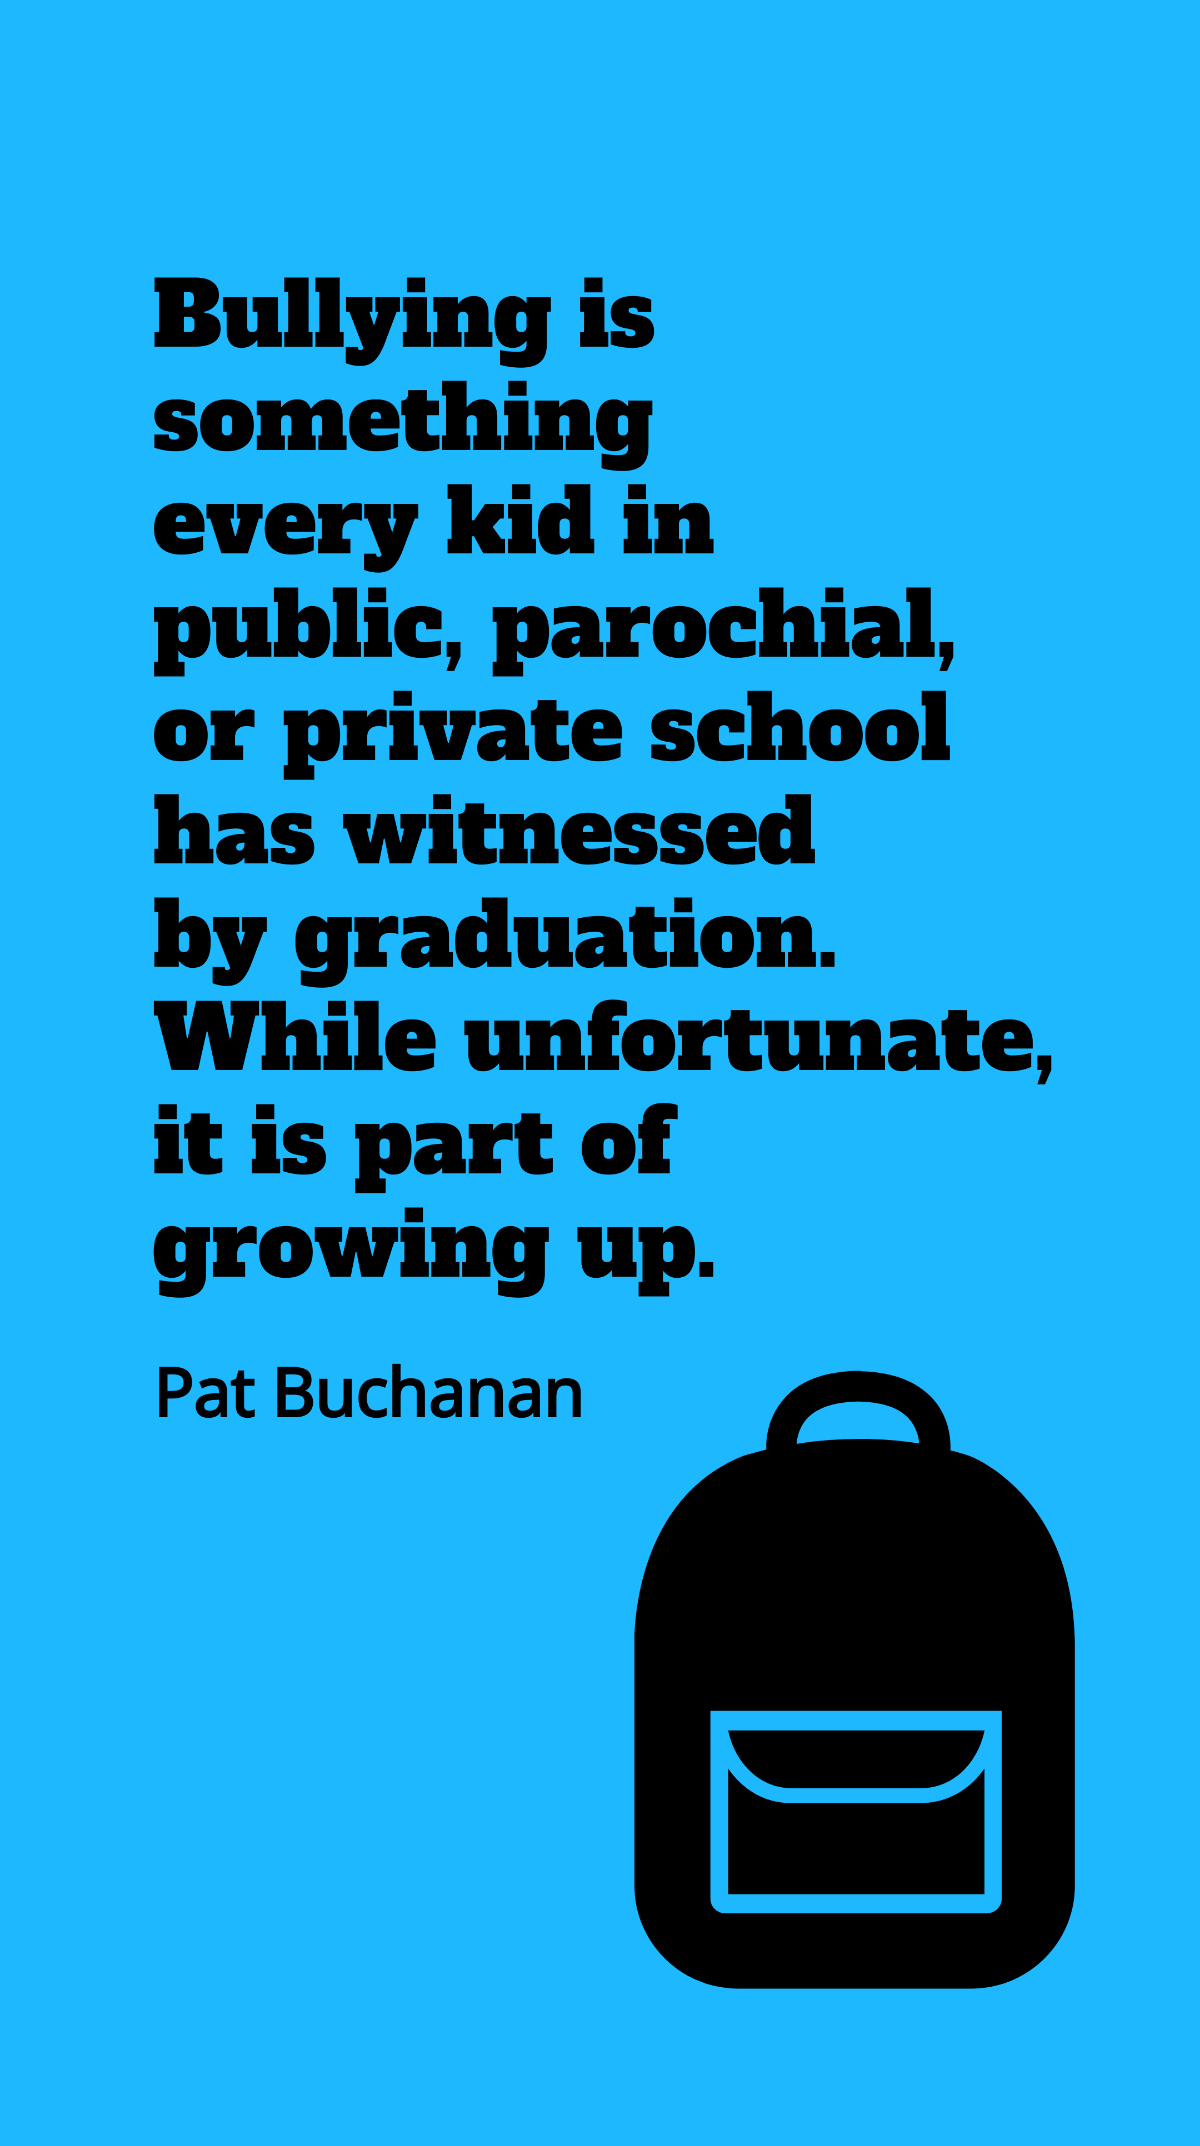 Pat Buchanan - Bullying is something every kid in public, parochial, or private school has witnessed by graduation. While unfortunate, it is part of growing up. Template